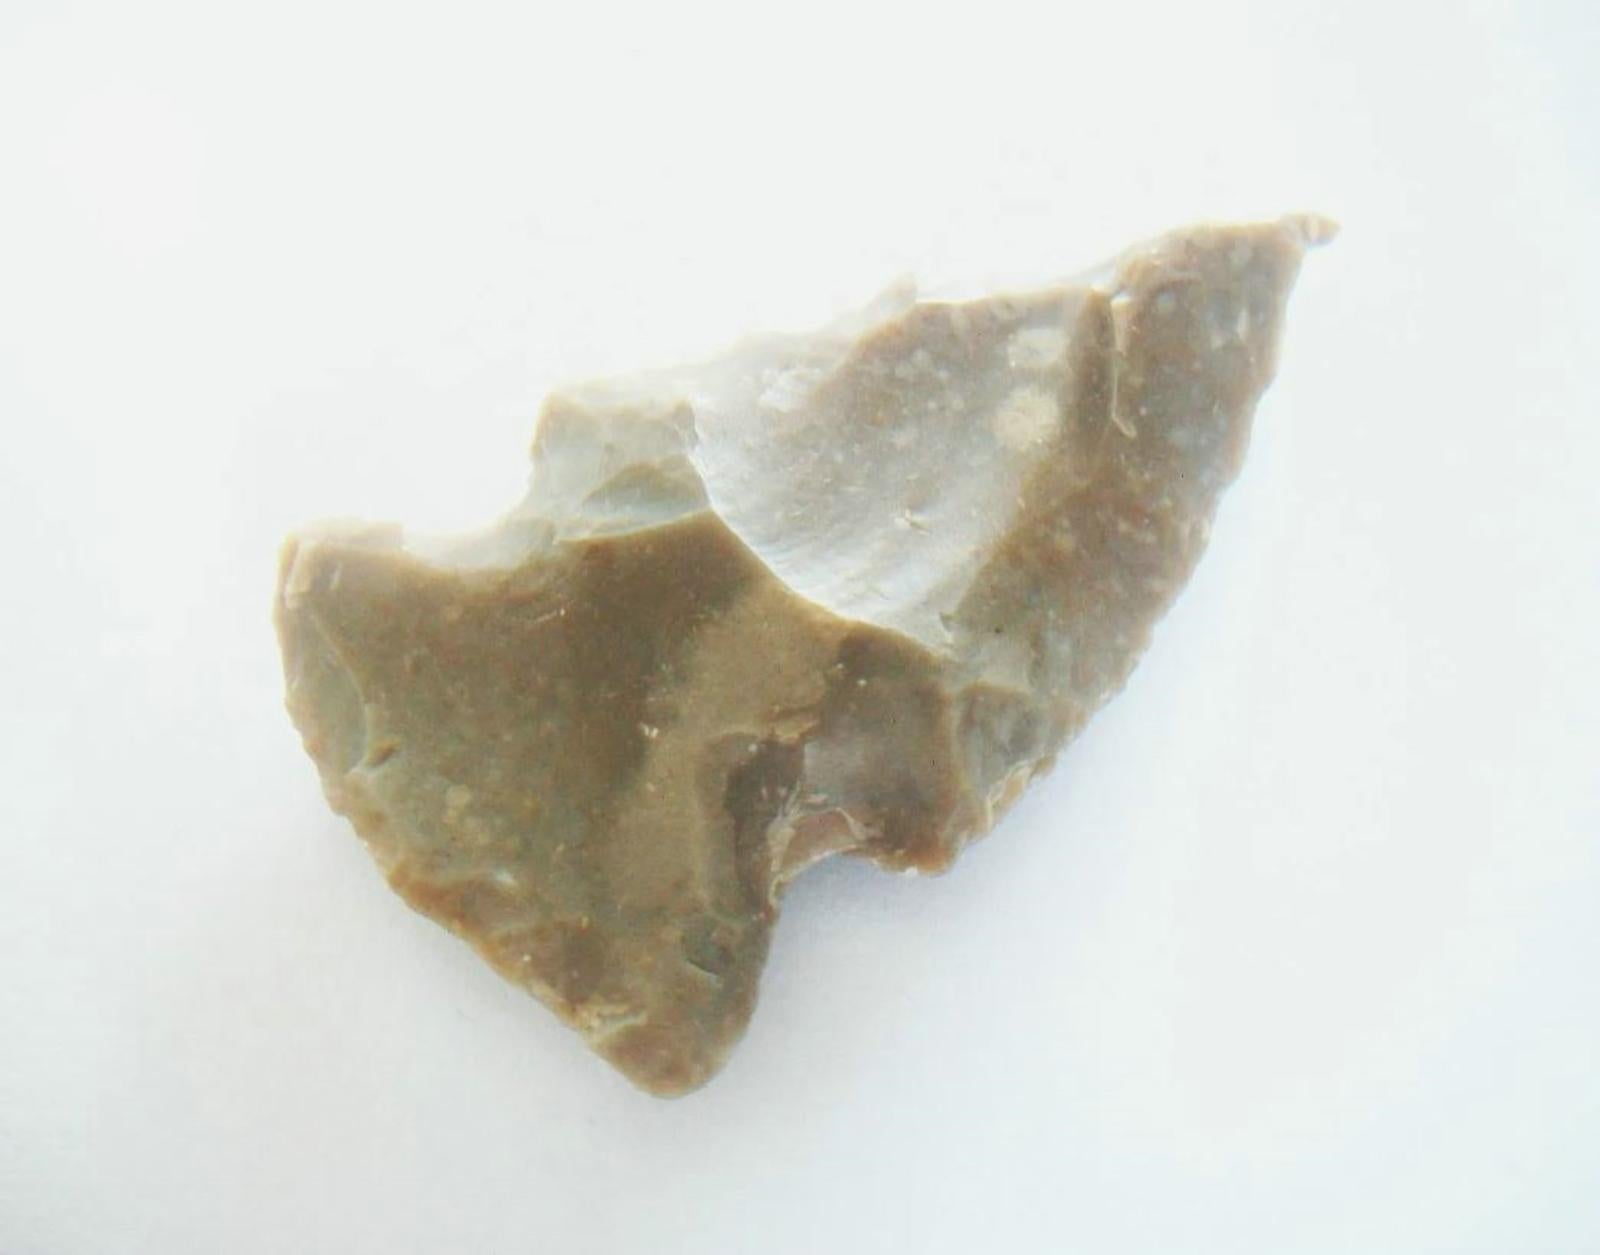 ARROWHEAD - Canadian First Nations Stone Projectile/Pendant - 2